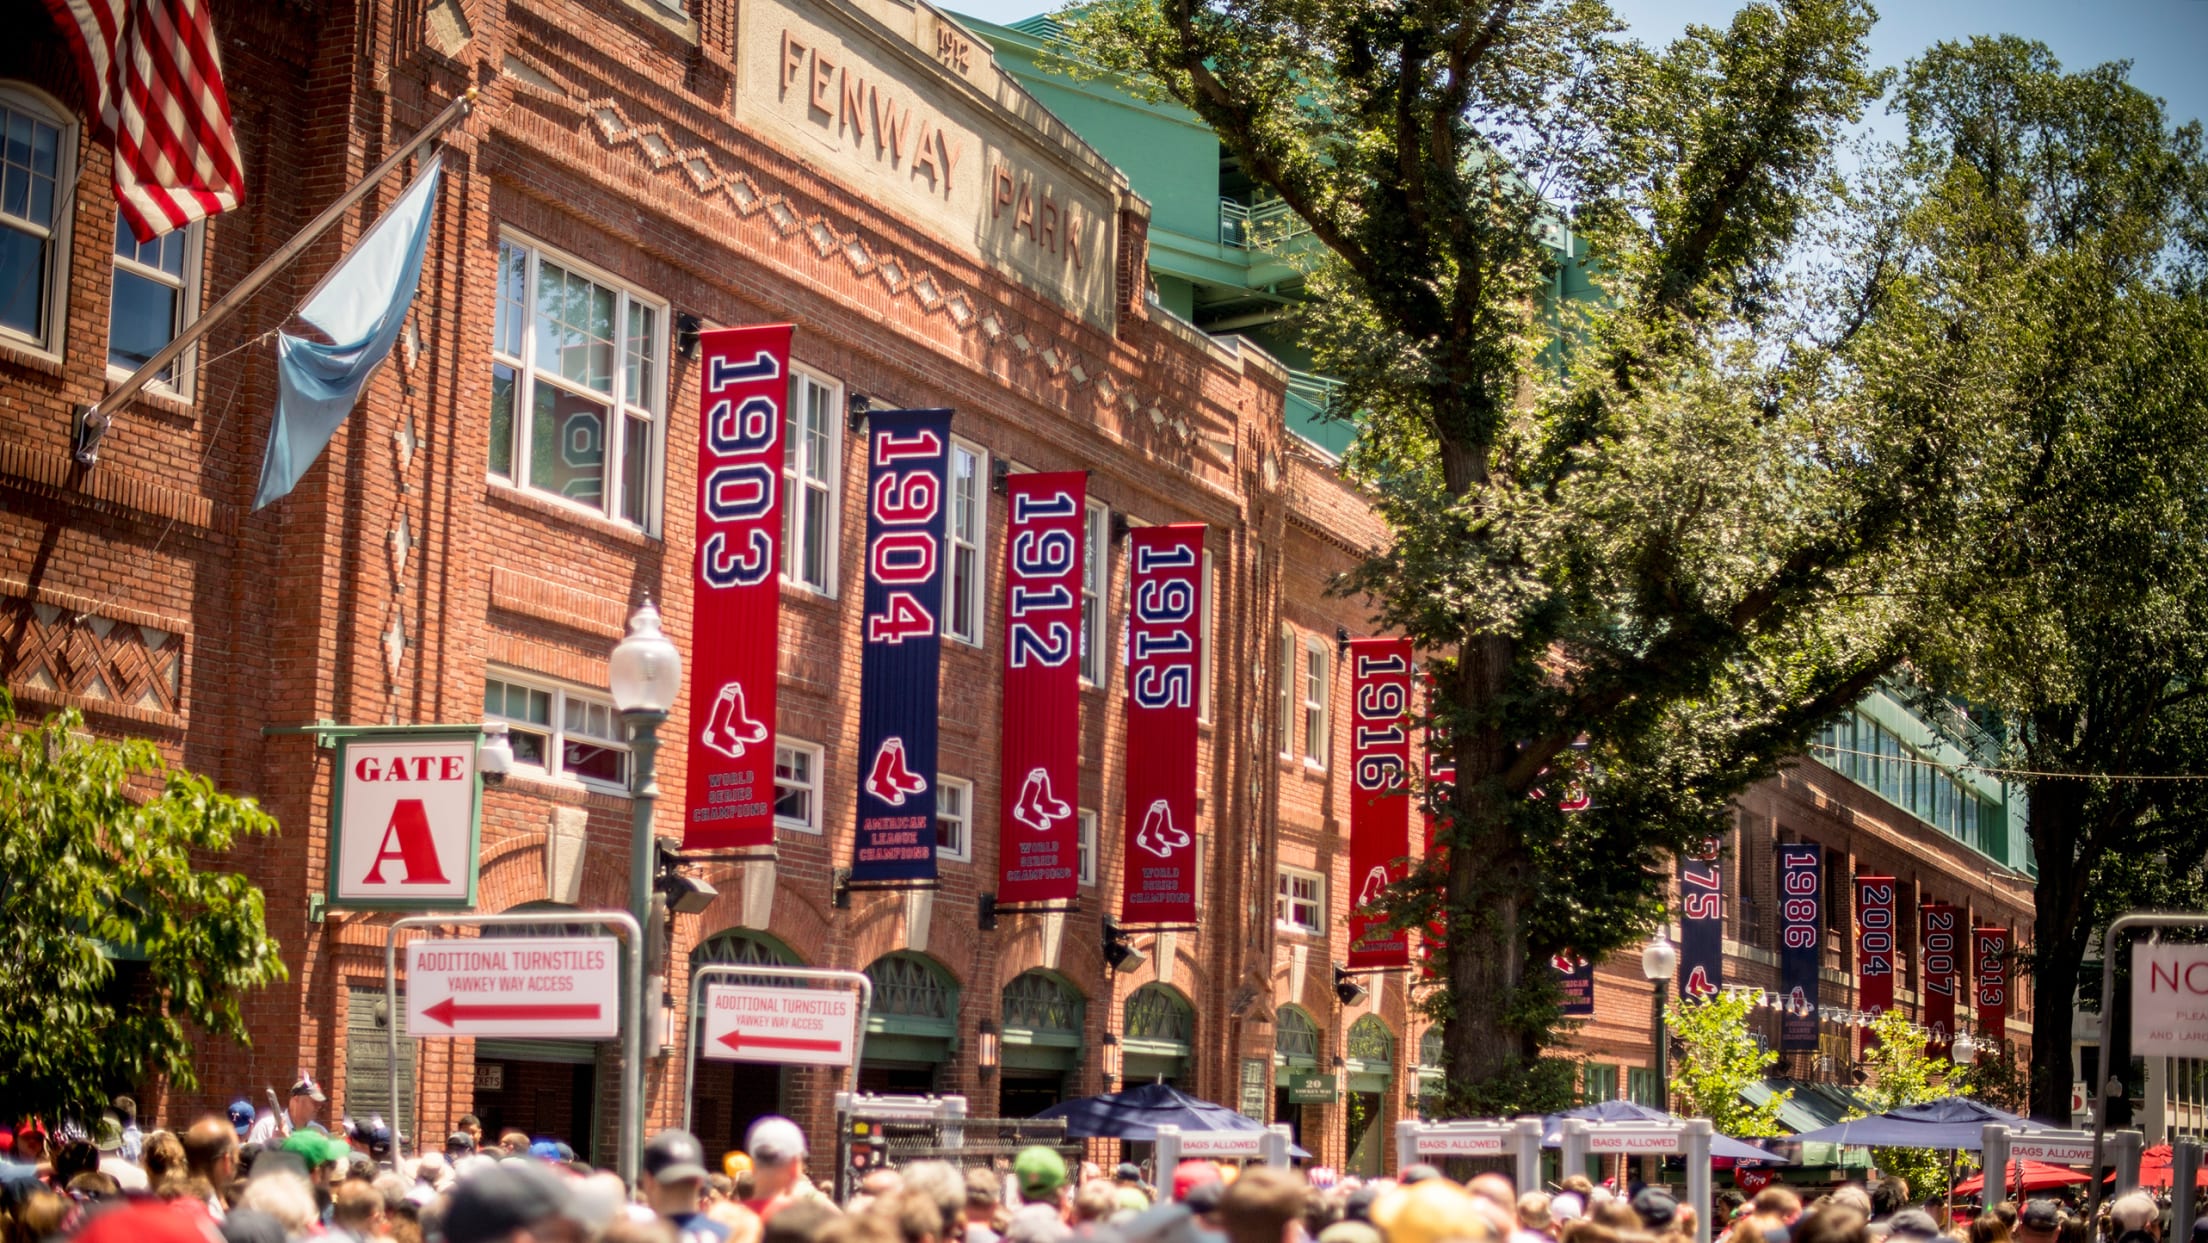 Cheap parking at Fenway? Only during a pandemic